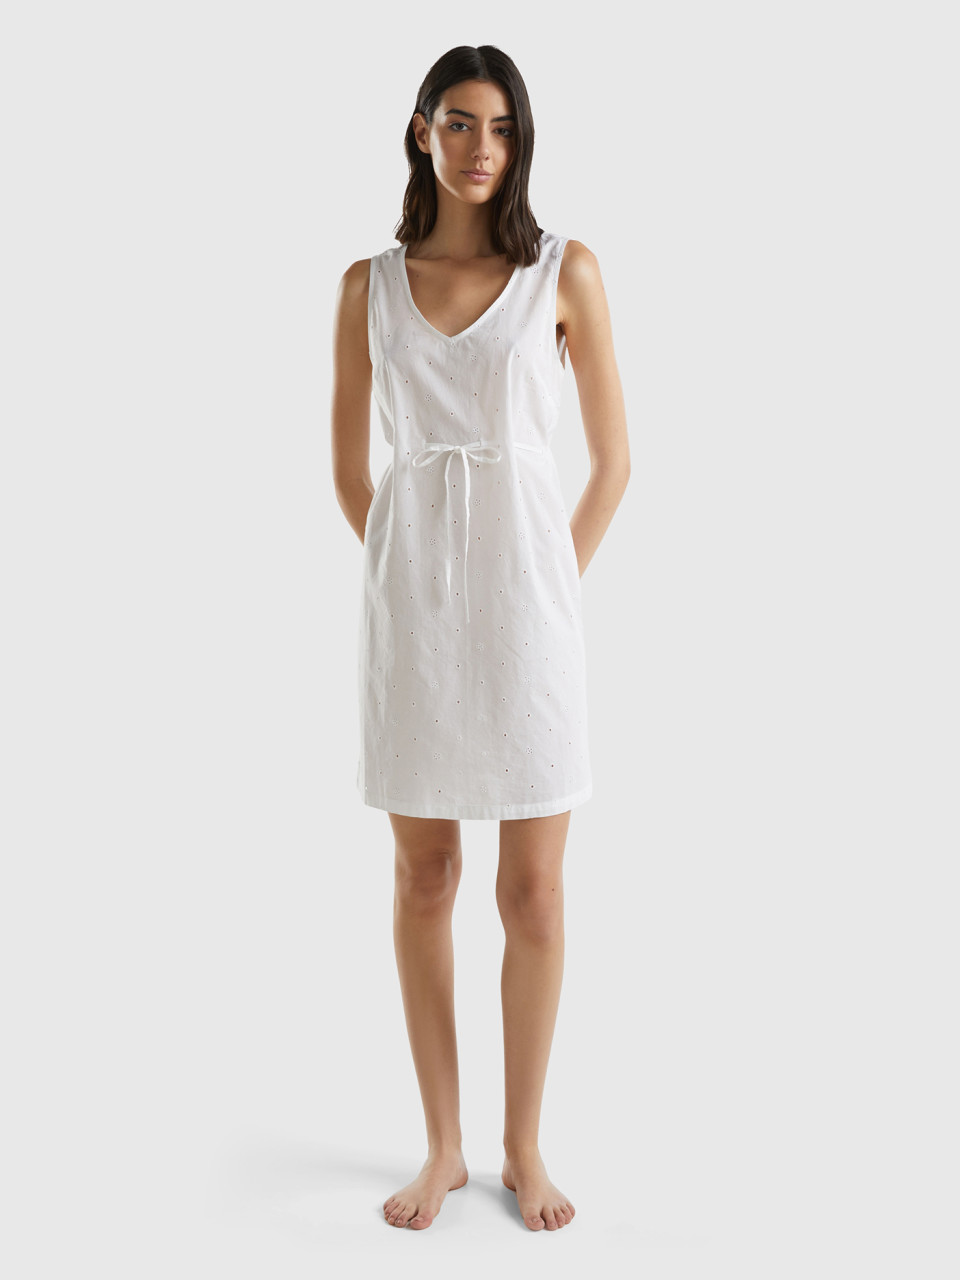 Benetton, Nightshirt With Broderie Anglaise, White, Women